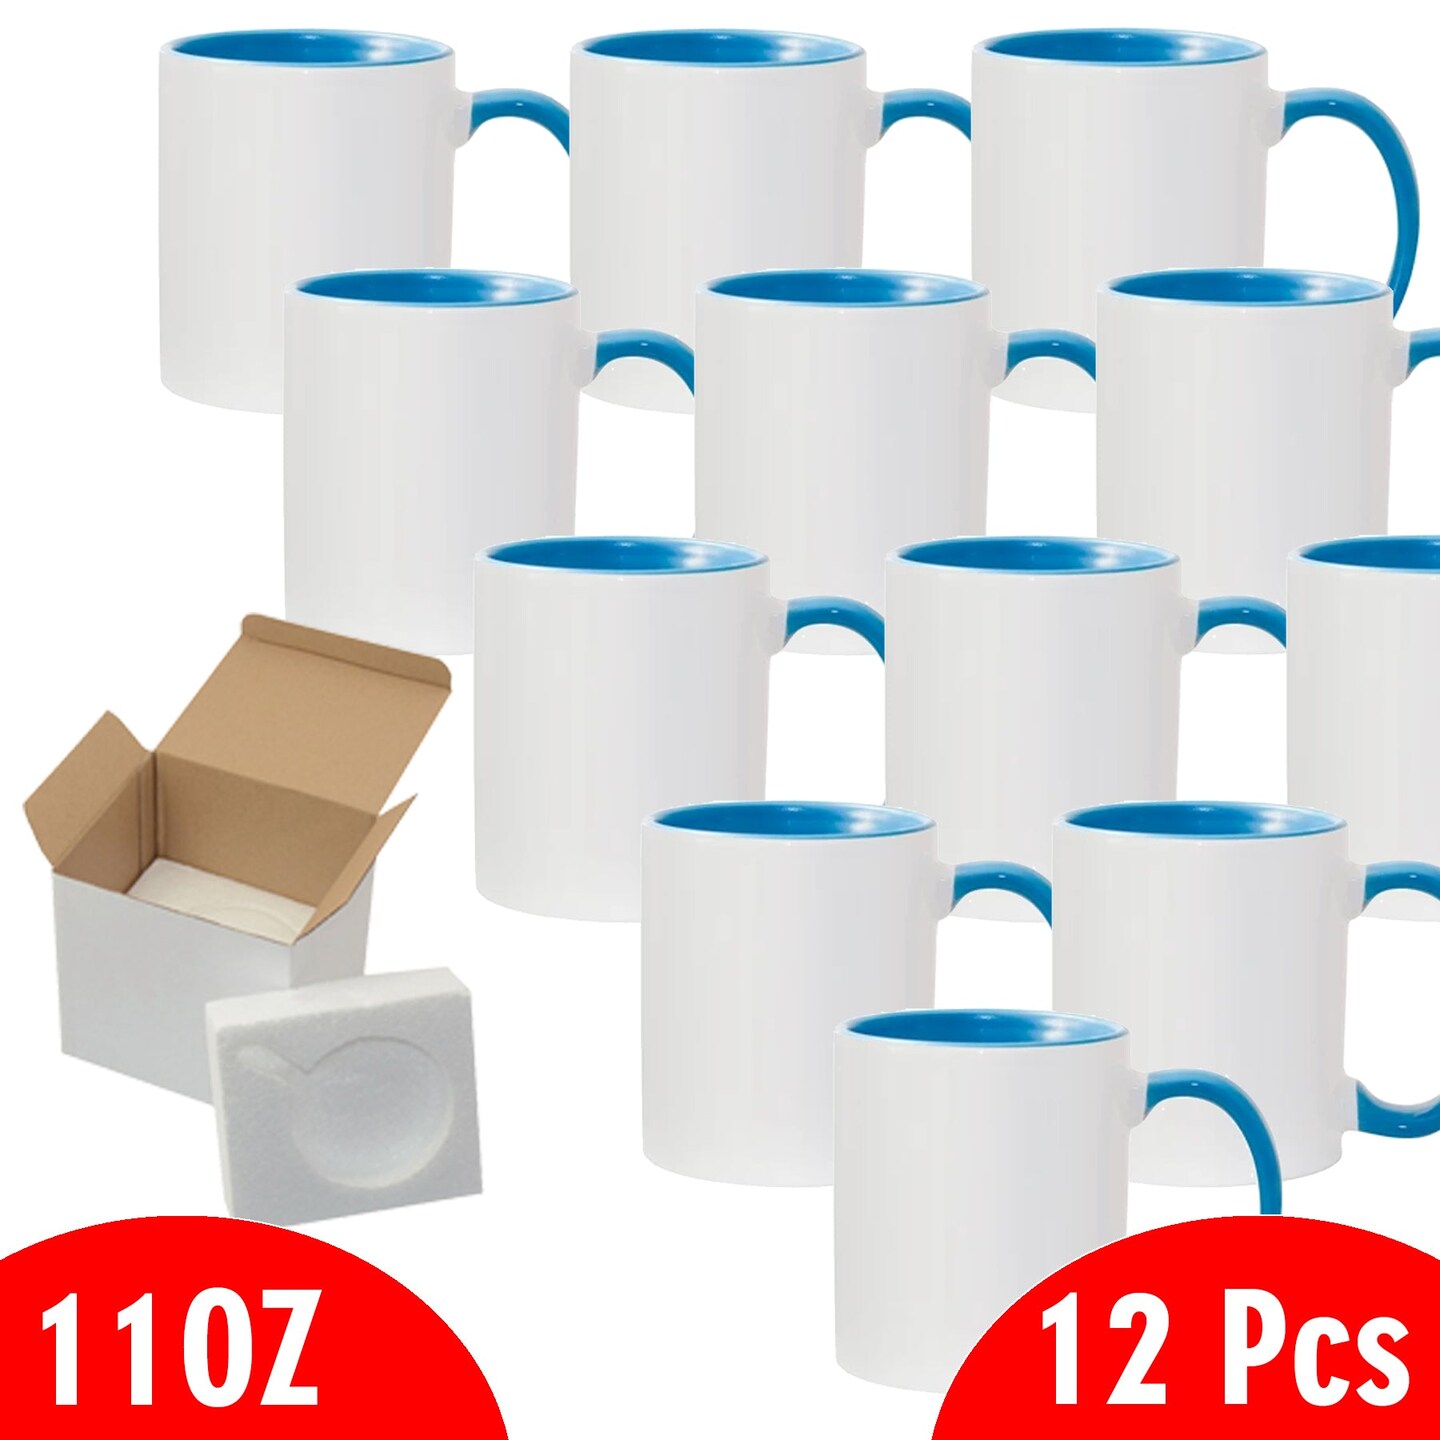  11oz Sublimation Mugs With Gift Mug Box. Mugs - Cardboard Box  with Foam Supports Case of 12 : Home & Kitchen